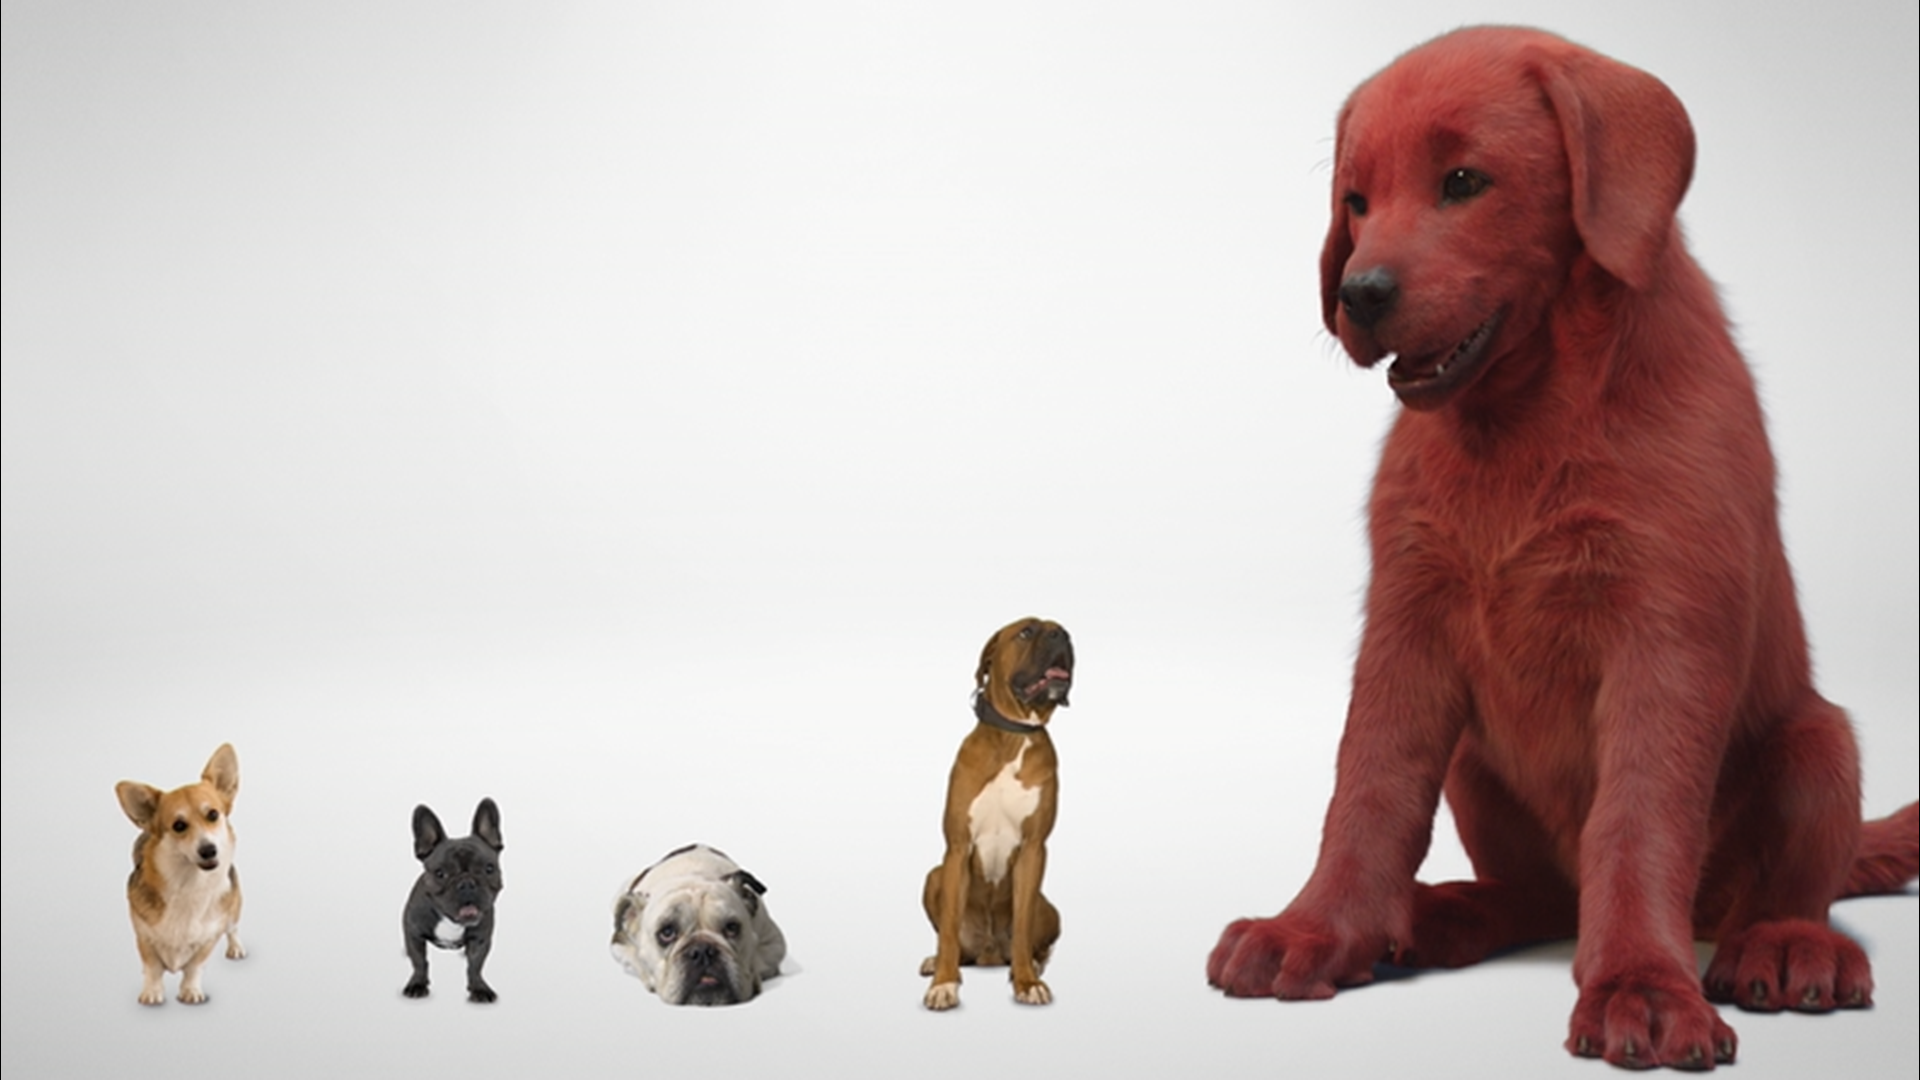 Paramount Pictures has released a first look at the upcoming live-action comedy film, "Clifford the Big Red Dog."